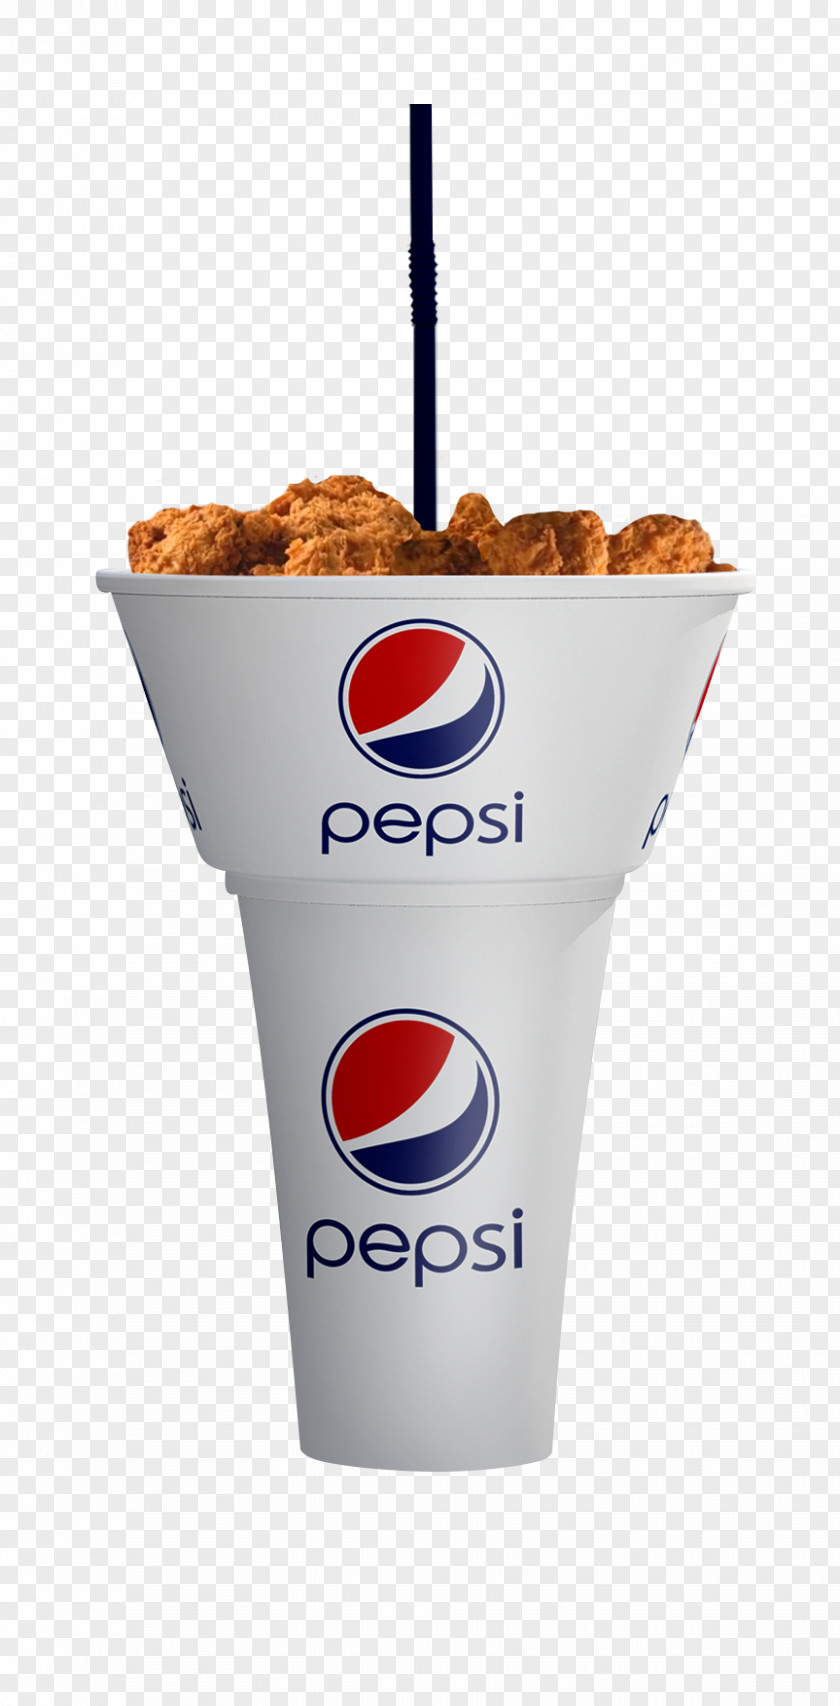 Drink Pepsi Dairy Products Restaurant Food PNG